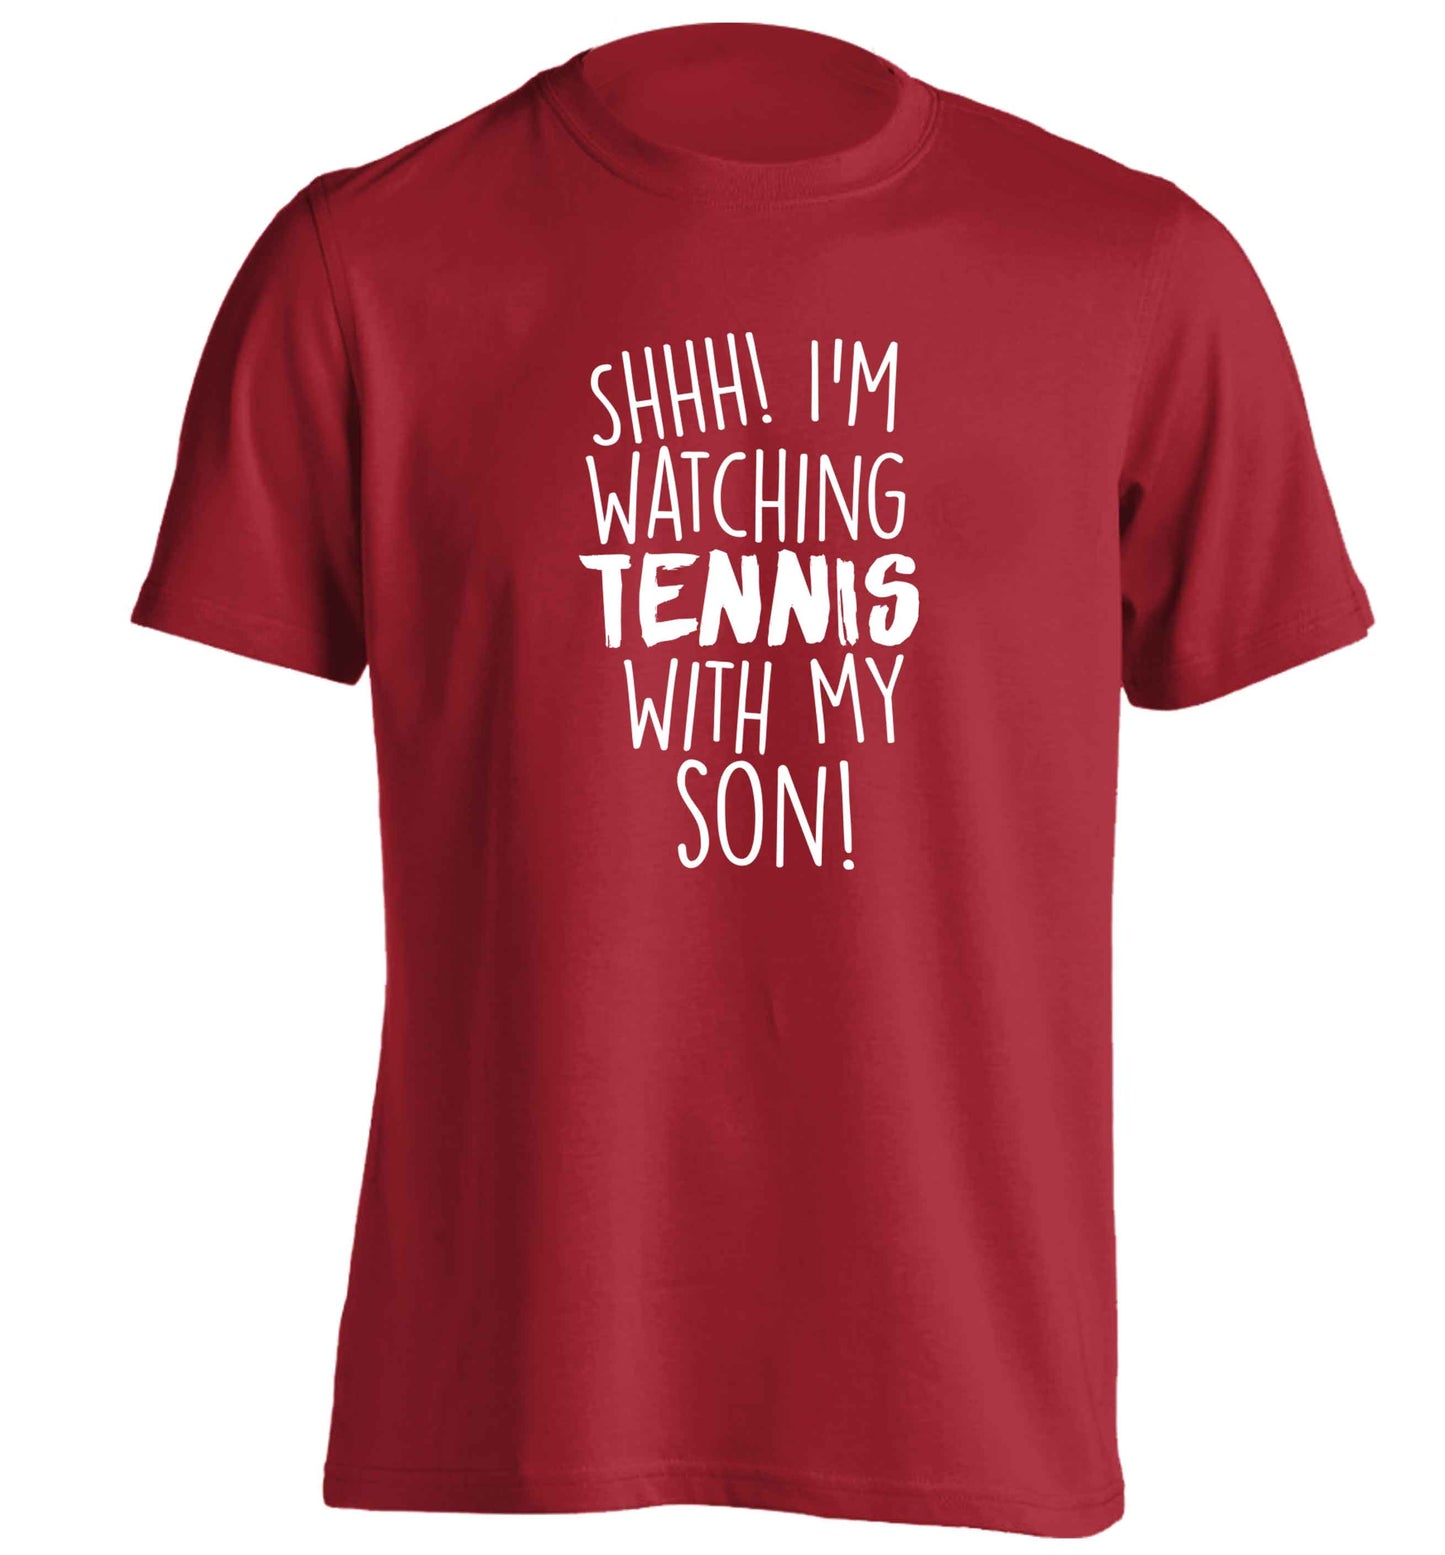 Shh! I'm watching tennis with my son! adults unisex red Tshirt 2XL